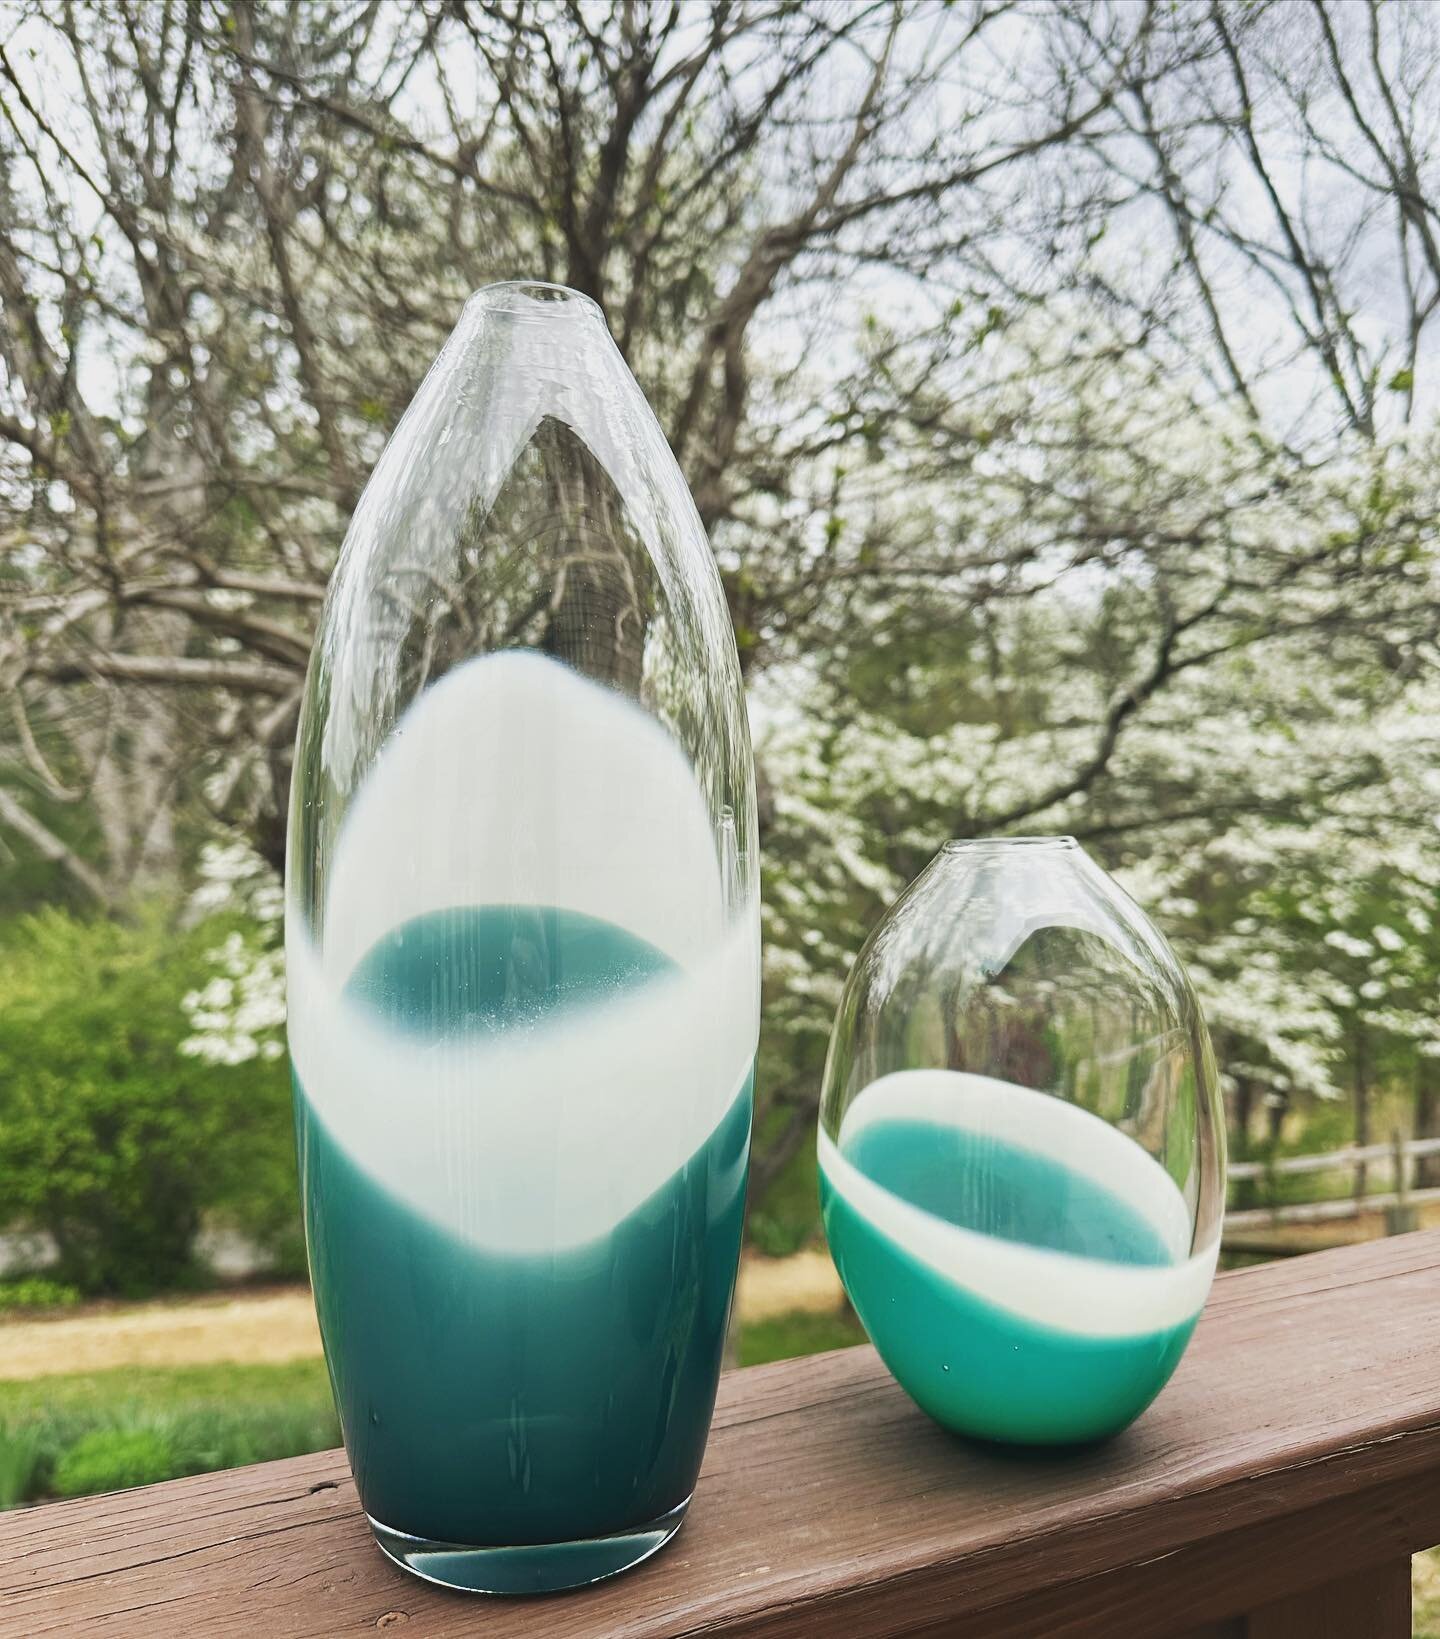 Loving a spring backdrop these days with this nice weather! Alright, what do we think?! Might add a third color and see what it looks like flattened.  Stay tuned 😬💙 dm if interested in purchasing! 
&bull;
&bull;
&bull;
&bull;
#glass #springtime #bl